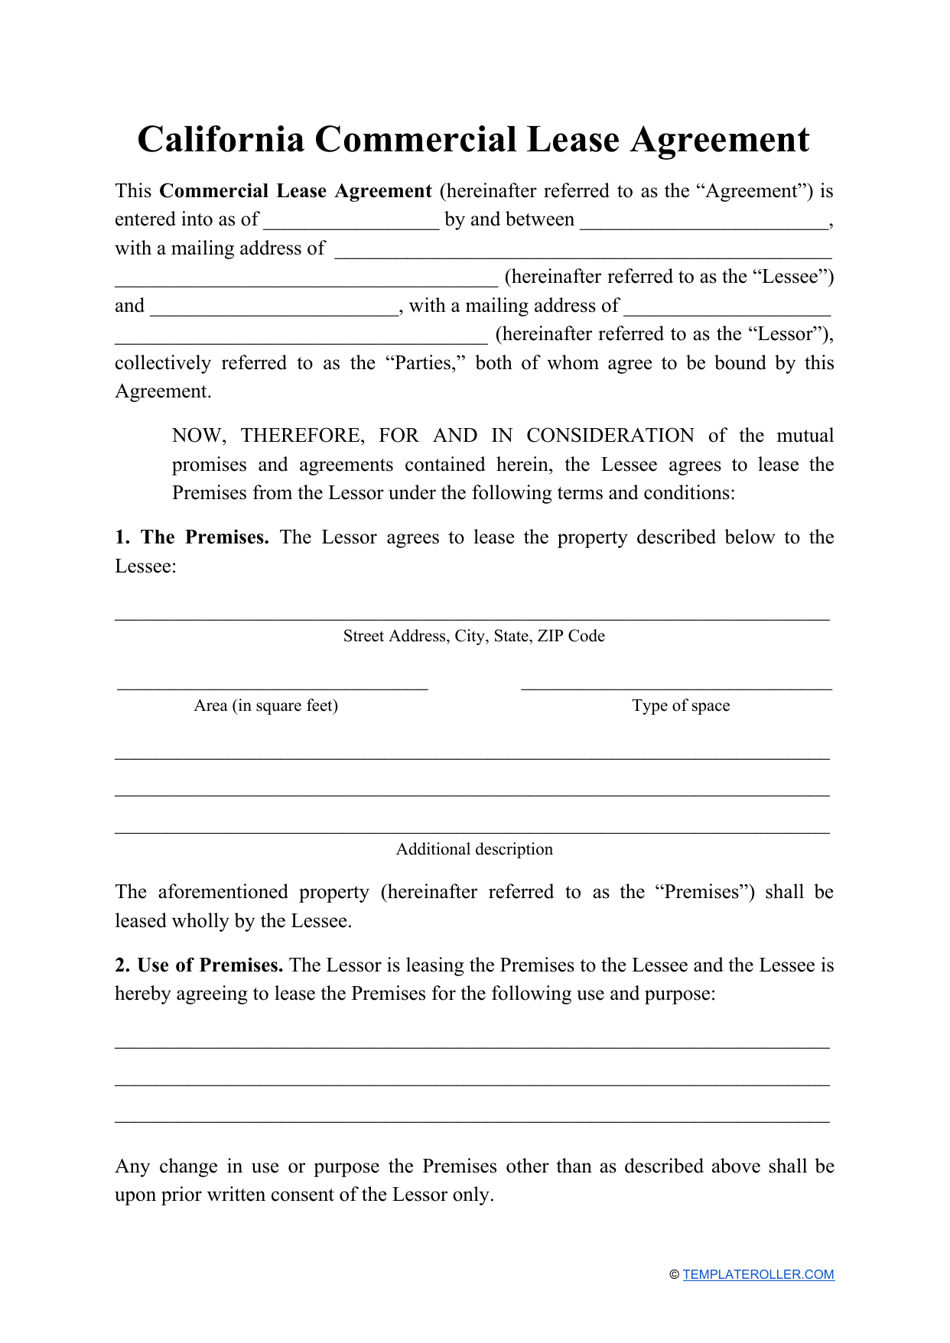 Commercial Lease Agreement Template - California, Page 1